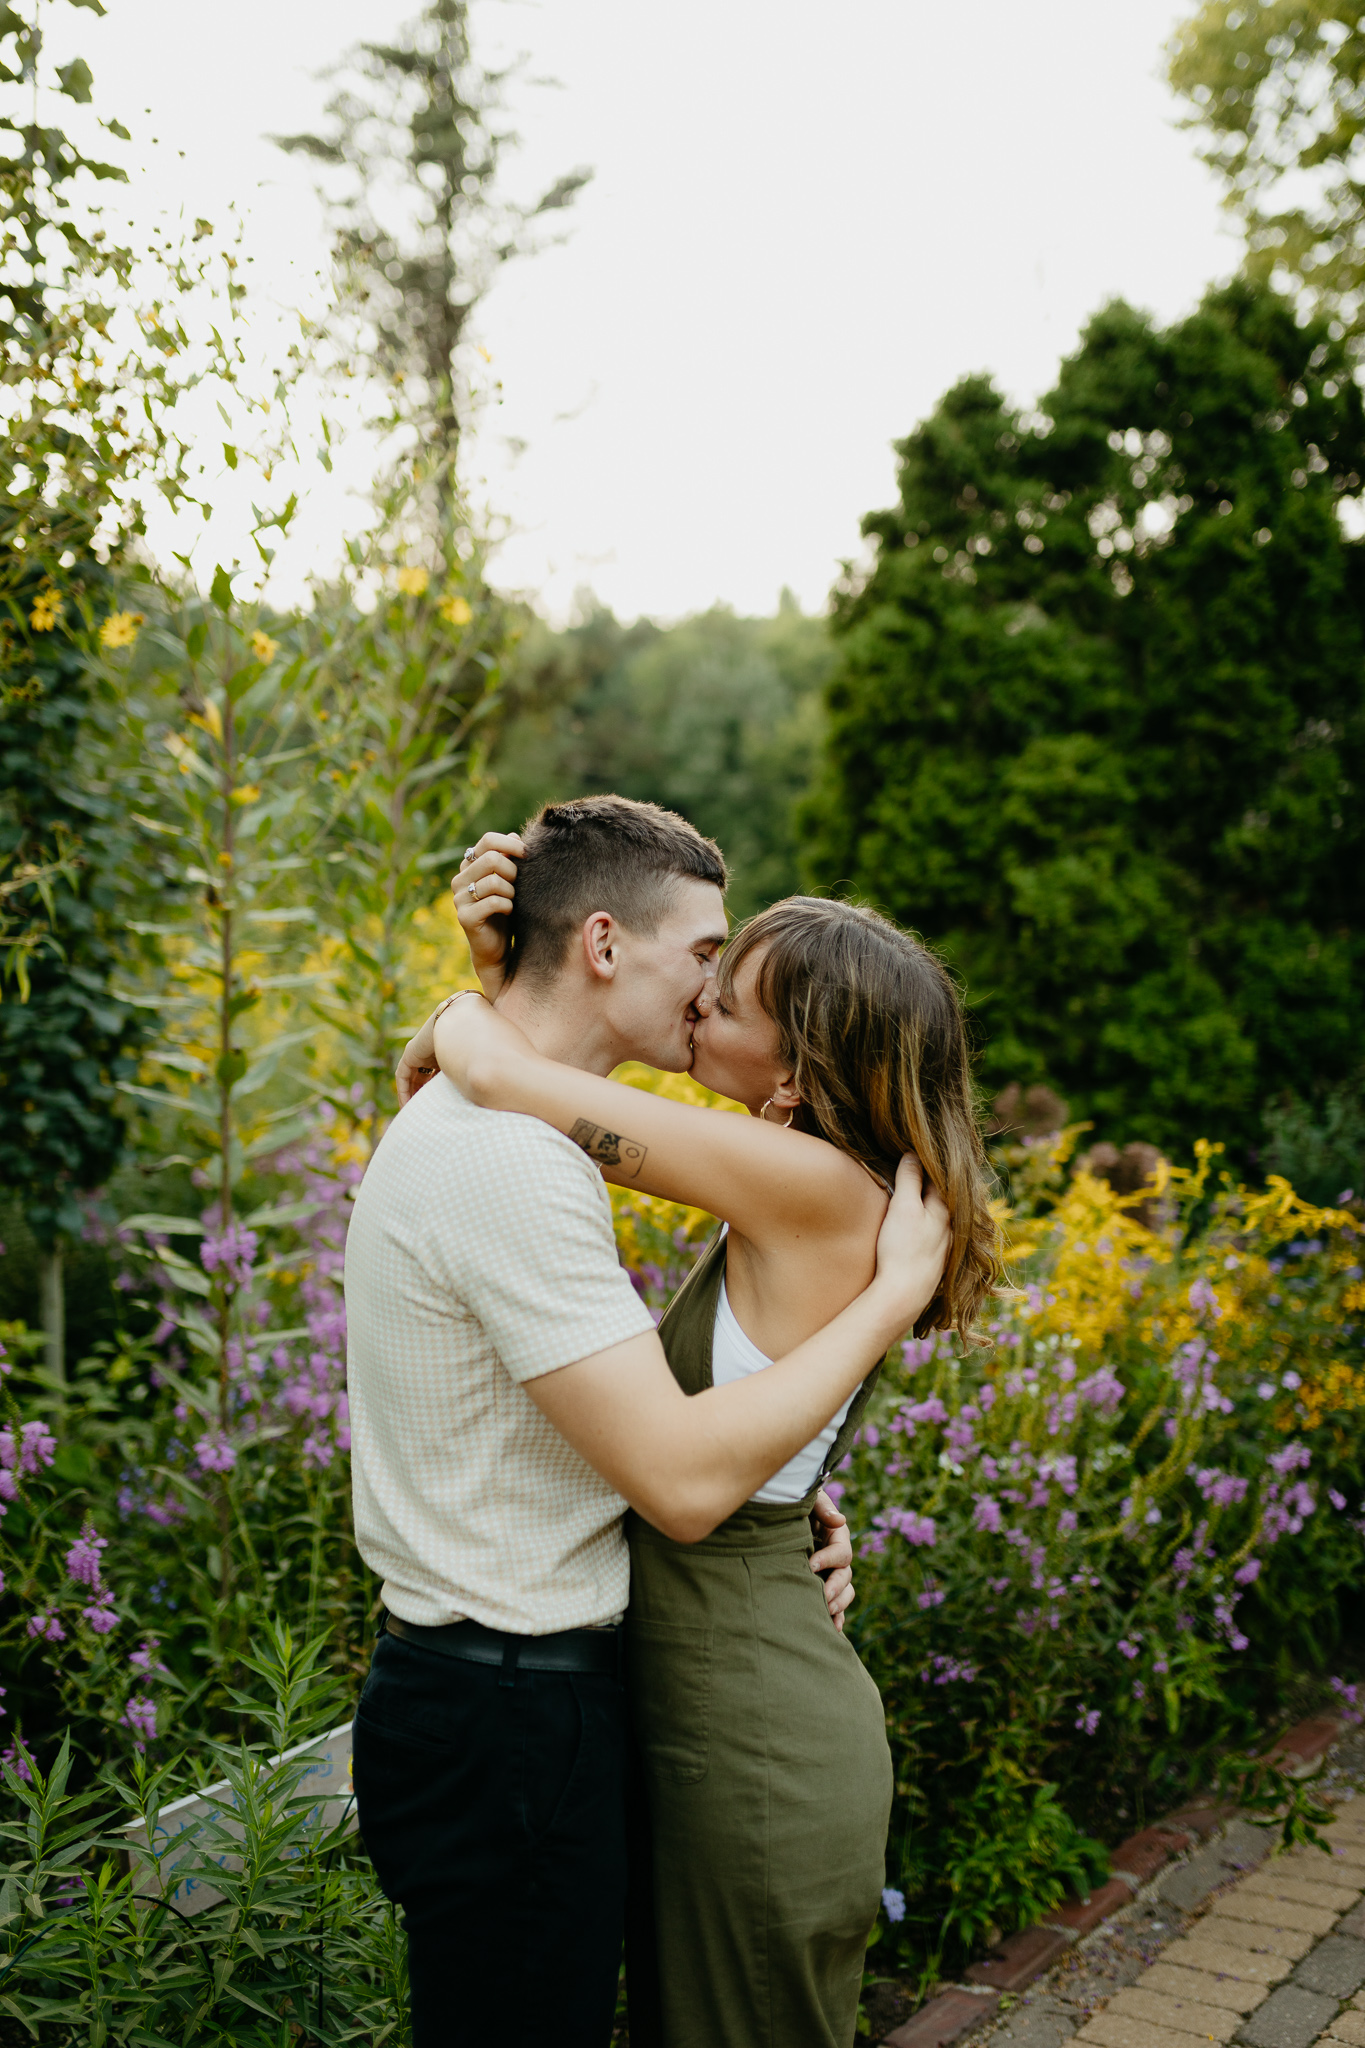 Defries Gardens Indiana couple photos || Wildflowers at Golden Hour